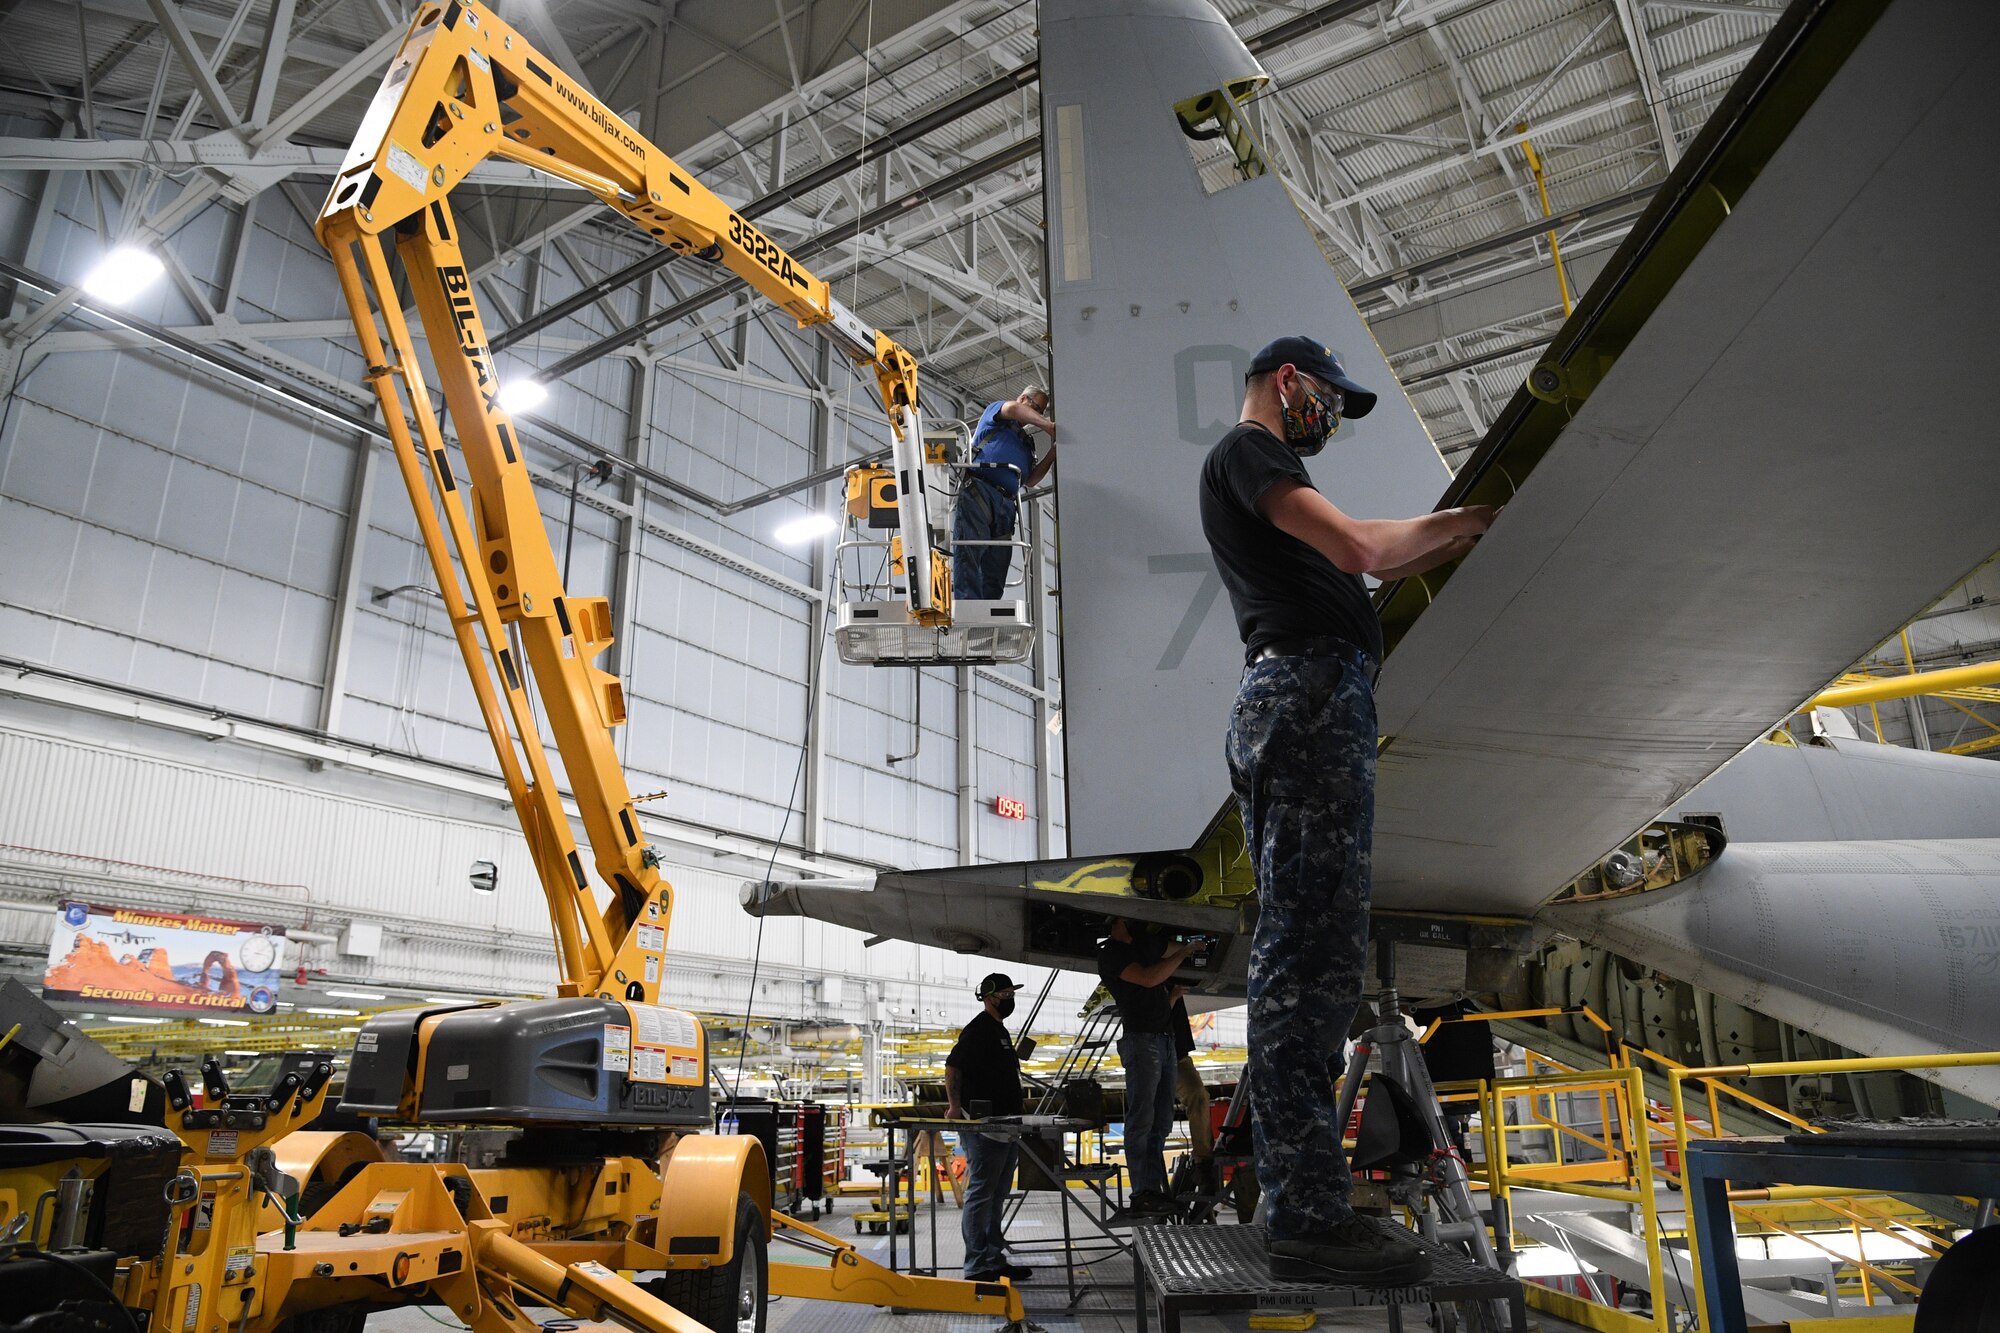 A 309th Aircraft Maintenance Group crew perform depot maintenance on a C-130 at Hill Air Force Base, Utah, May 8, 2020. Comprised of seven maintenance squadrons and more than 2,000 personnel, the 309th AMXG performs depot maintenance, repair and overhaul on A-10, C-130, F-16, F-22, F-35 and T-38 airframes. (U.S. Air Force photo by R. Nial Bradshaw)